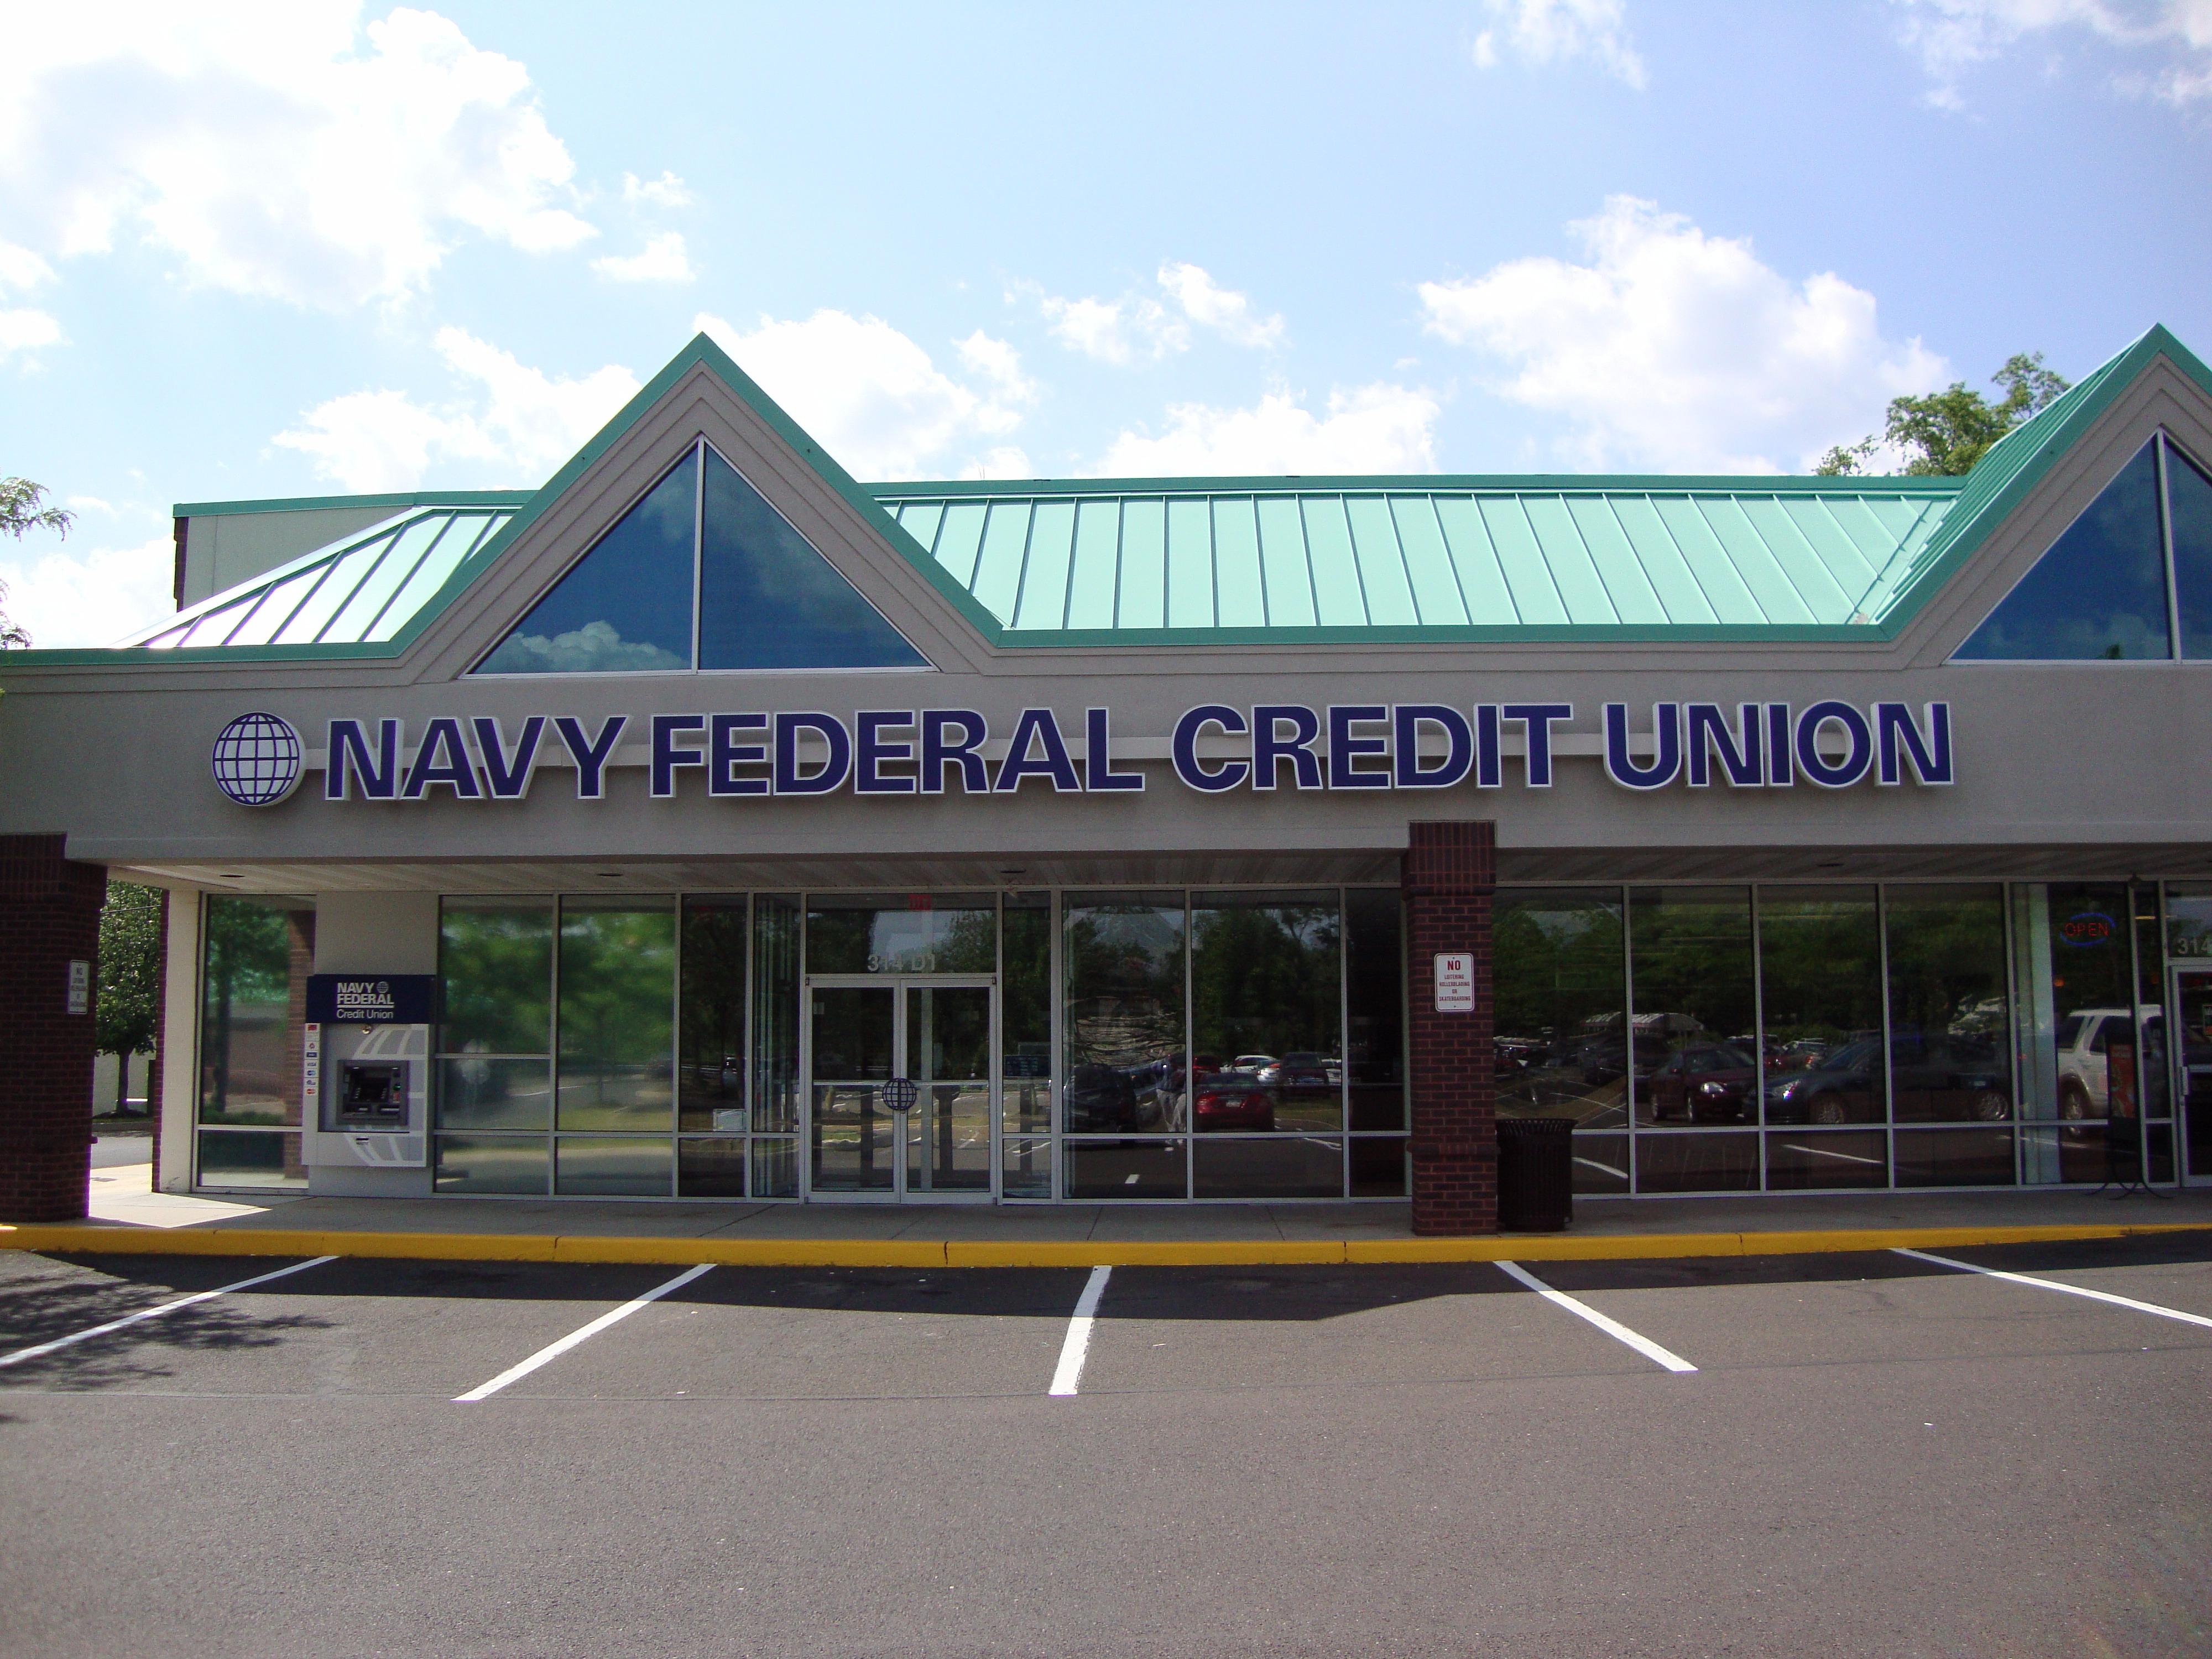 Navy Federal Credit Union Coupons near me in Horsham | 8coupons